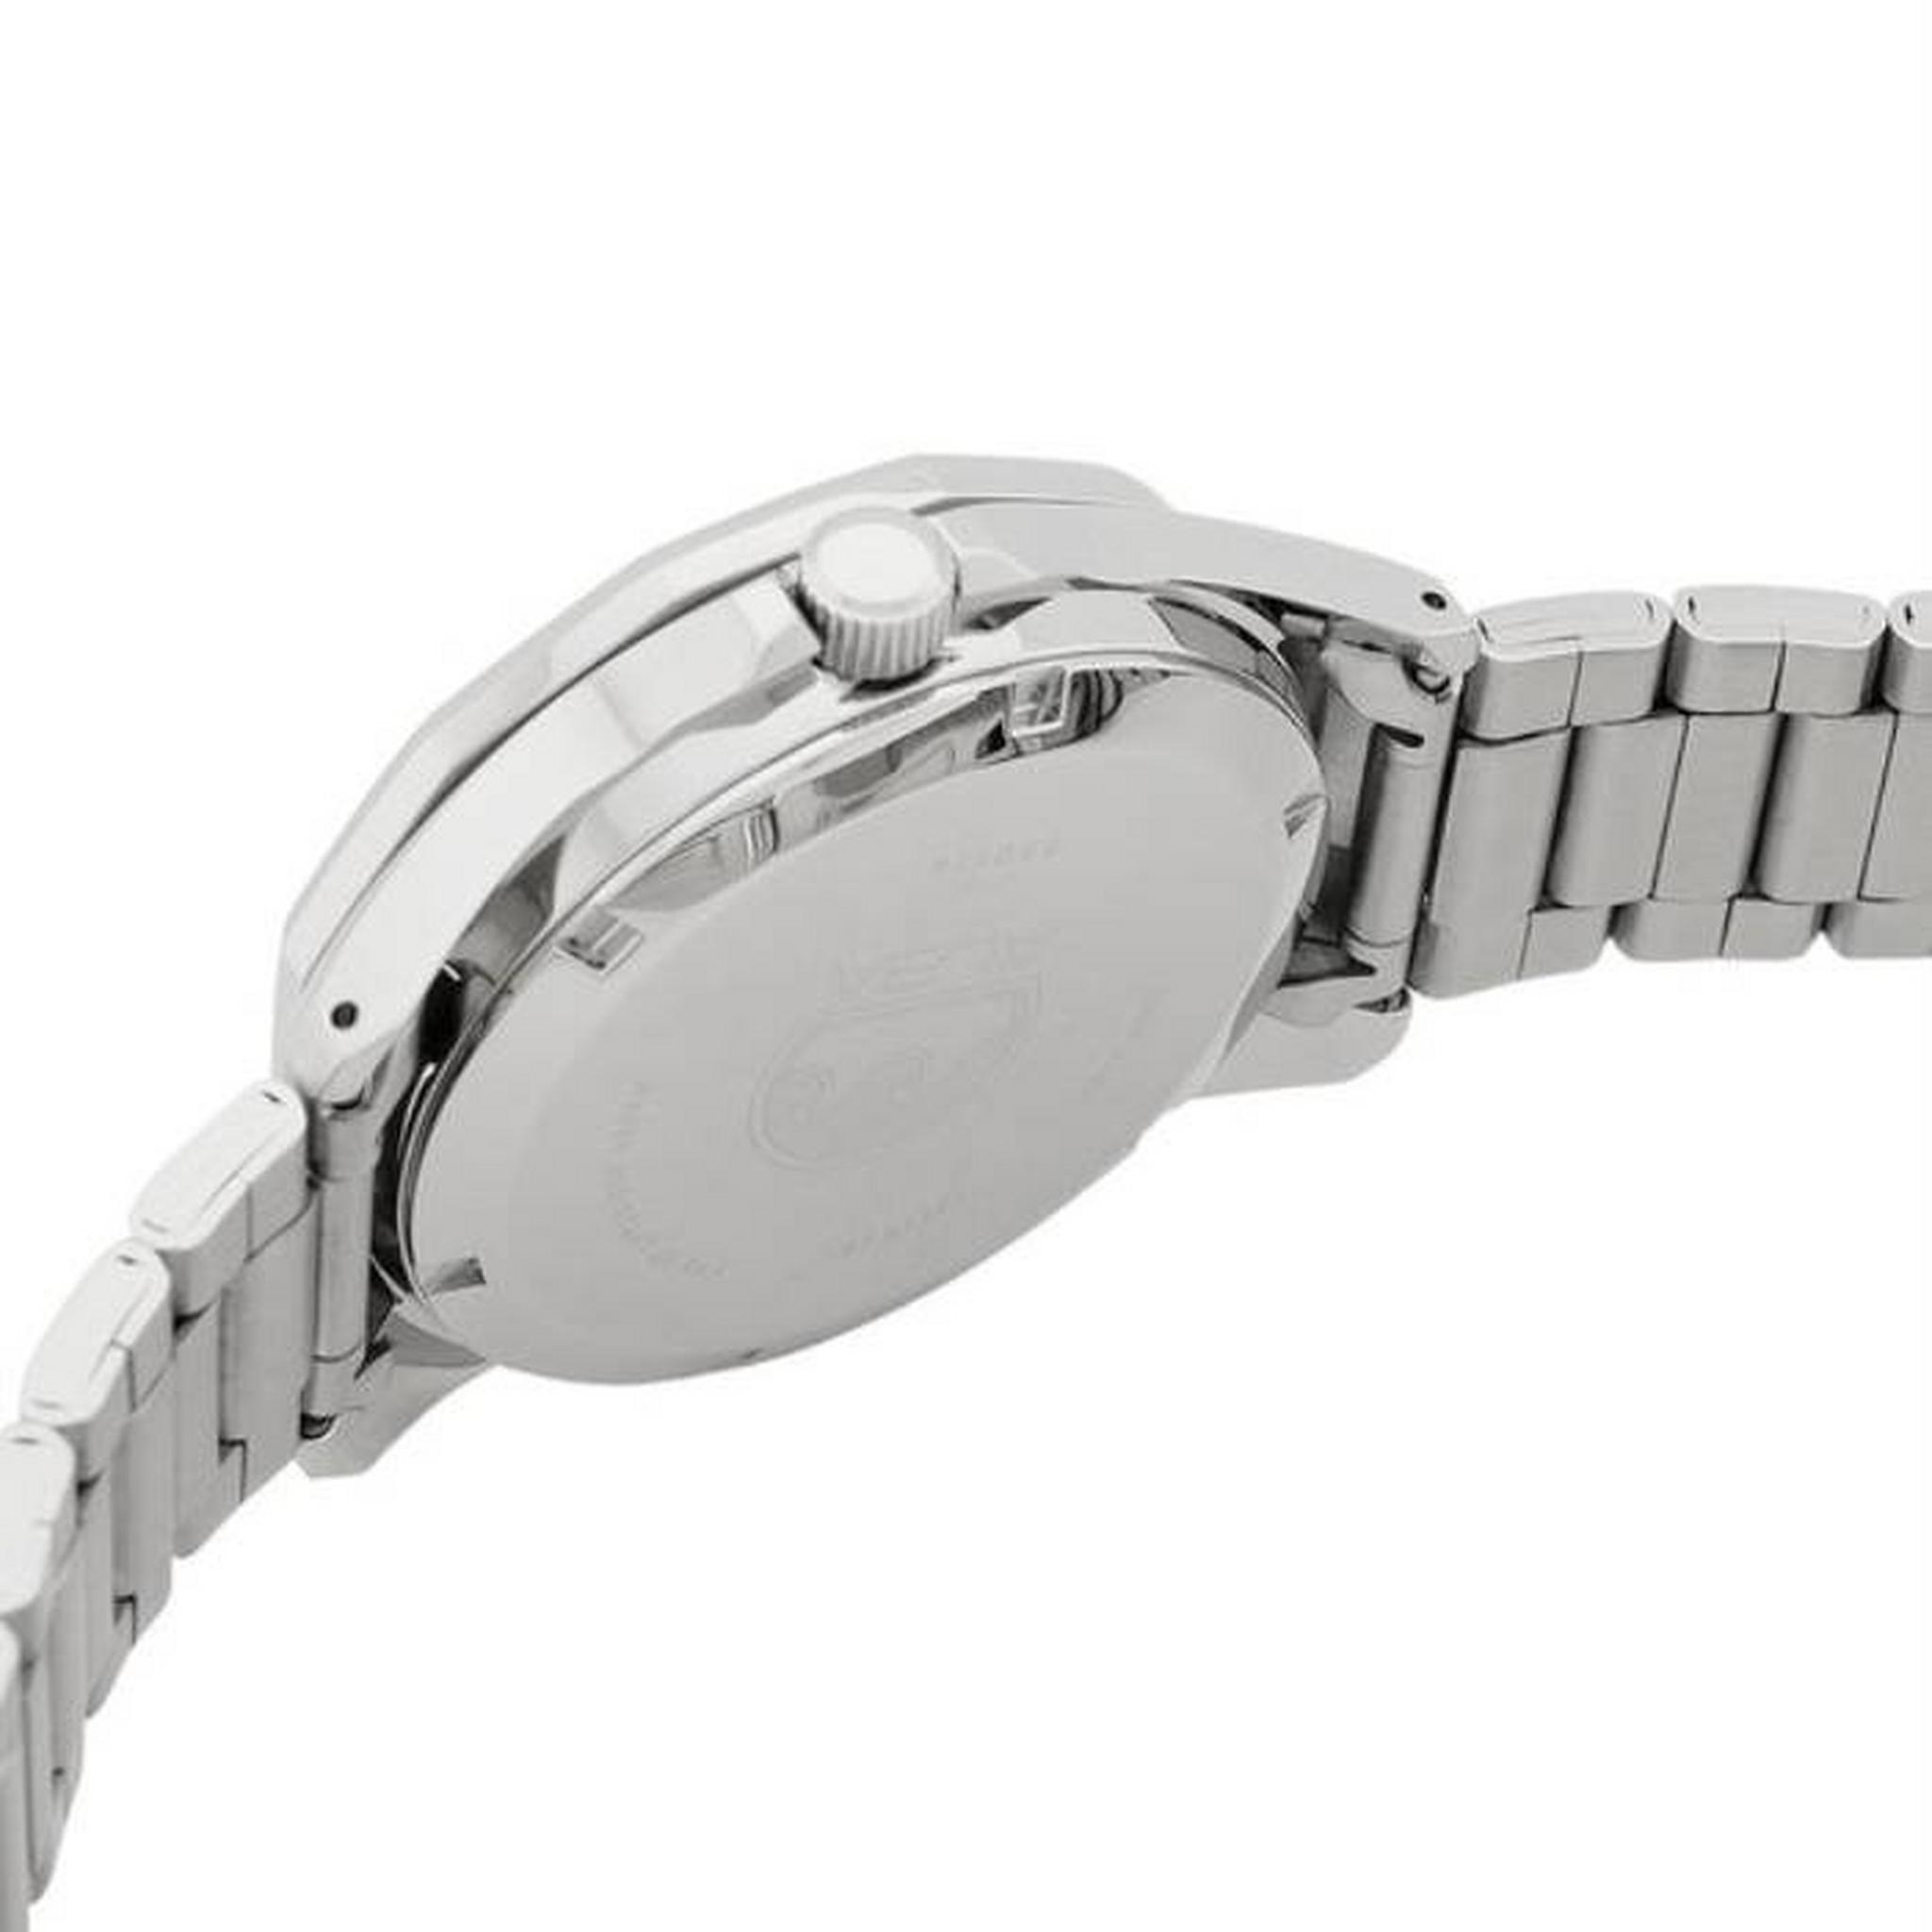 Alba Mechanical Watch for Men, Analog, 43mm, Stainless Steel Strap, AL4453X1 – Silver